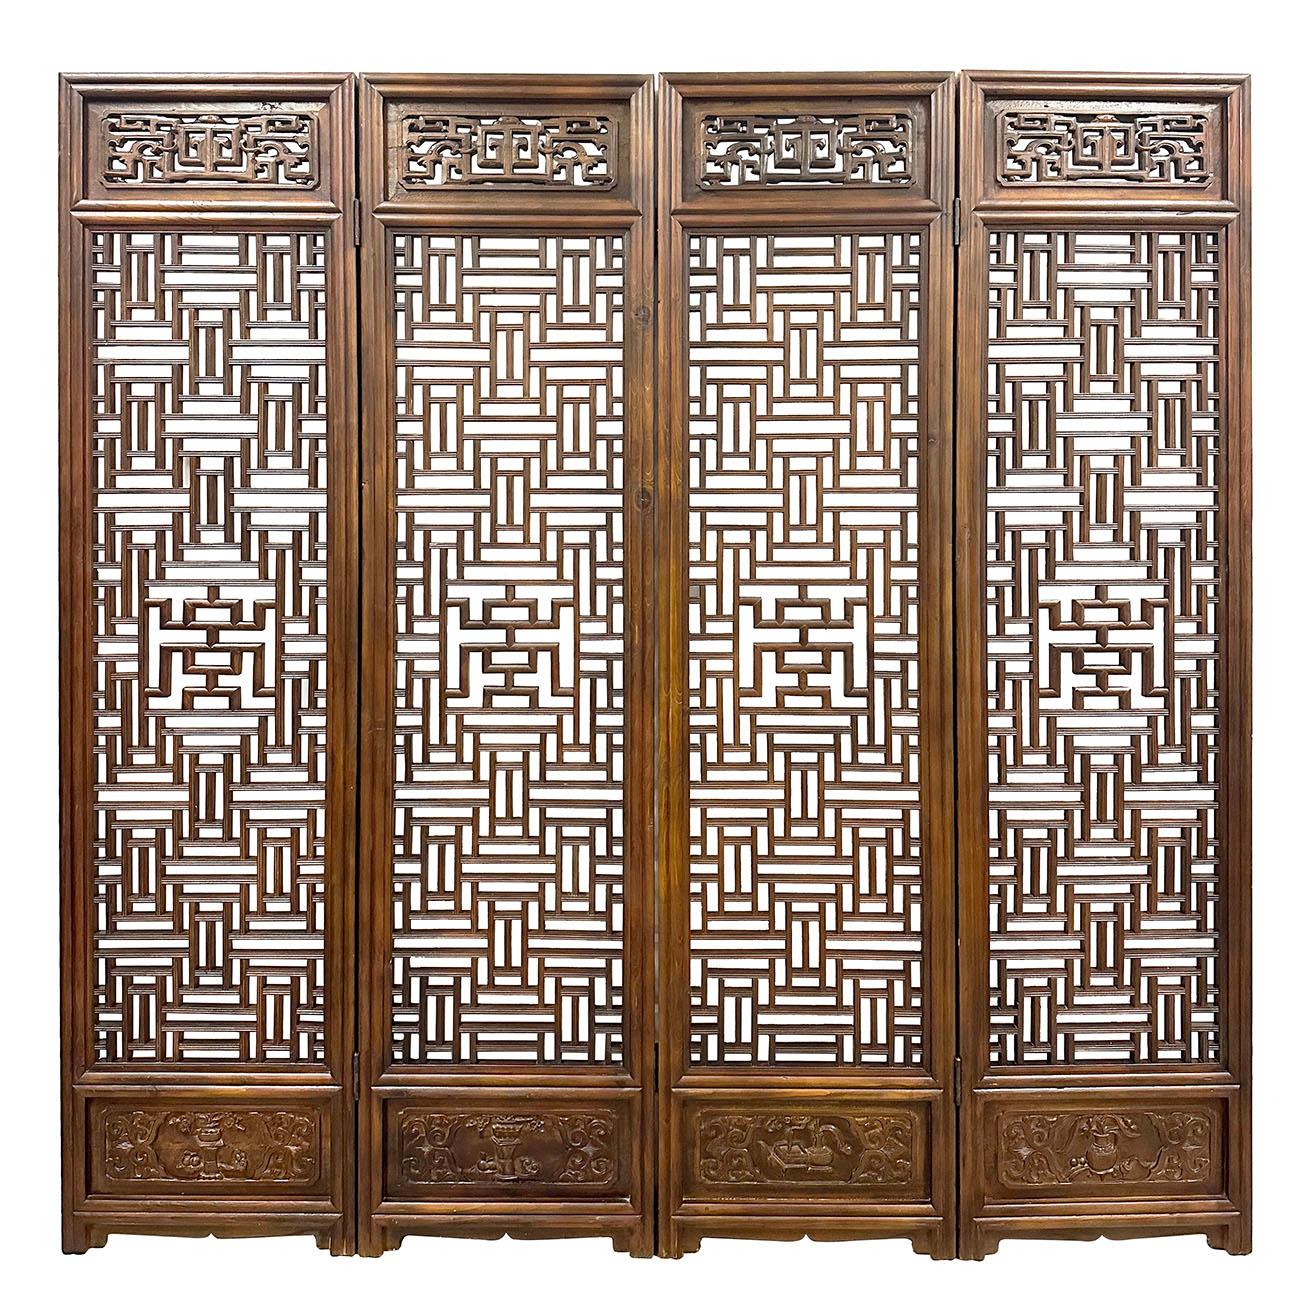 A set of four Chinese large carved wooden screen, with fretwork design, Created in China during mid 20th century, each of this set of four of large panels captures our attention with its carefully organized arrangement of fretwork motifs and